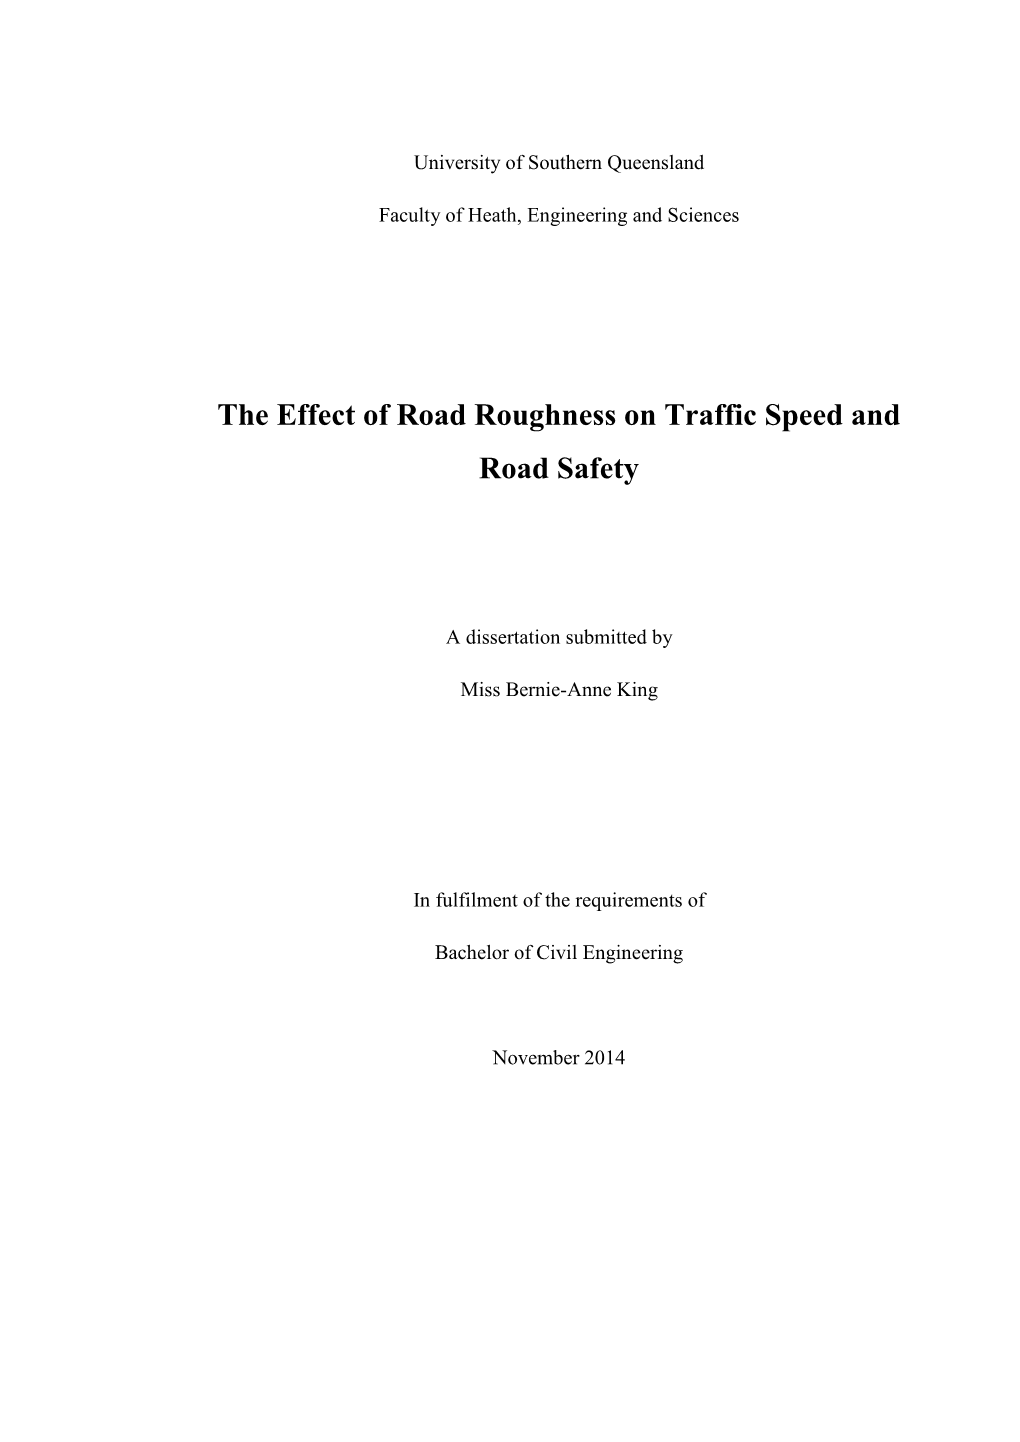 The Effect of Road Roughness on Traffic Speed and Road Safety